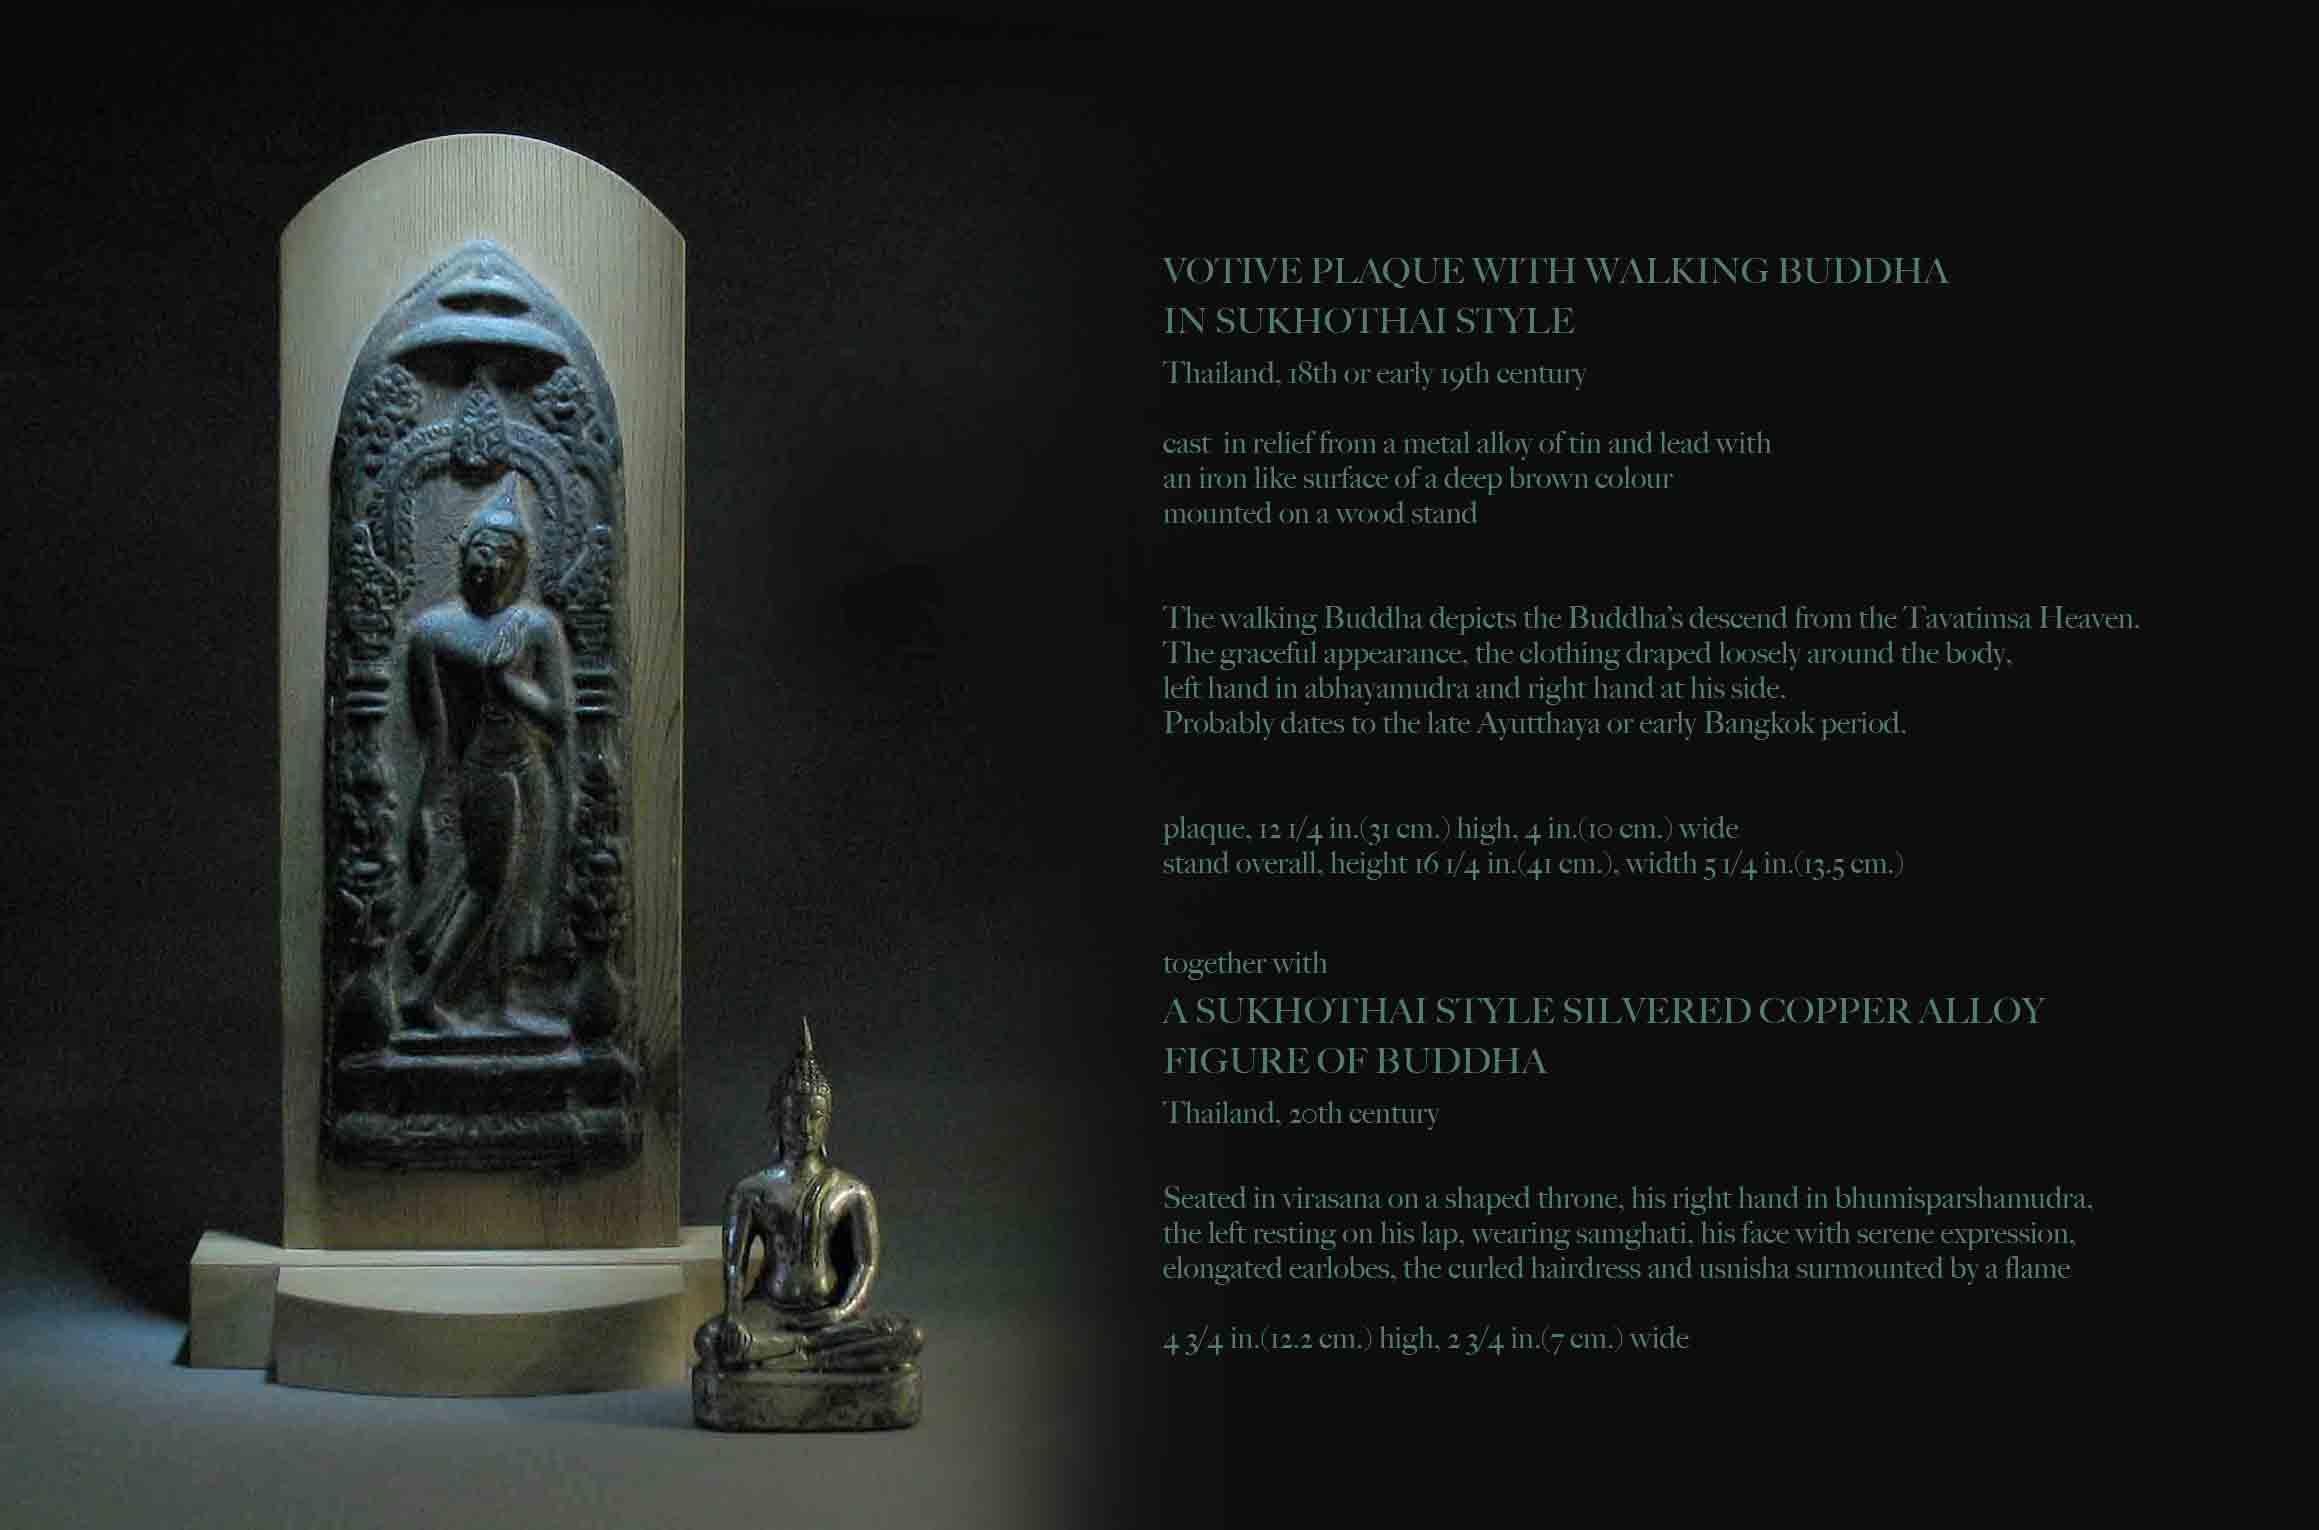 Votive Plaque with Walking Buddha in Sukhothai Style, Thailand, 18th or 19th century, cast in relief from a metal alloy of tin and lead with an iron like surface of a deep brown color mounted on a wood stand. 
The walking Buddha depicts the